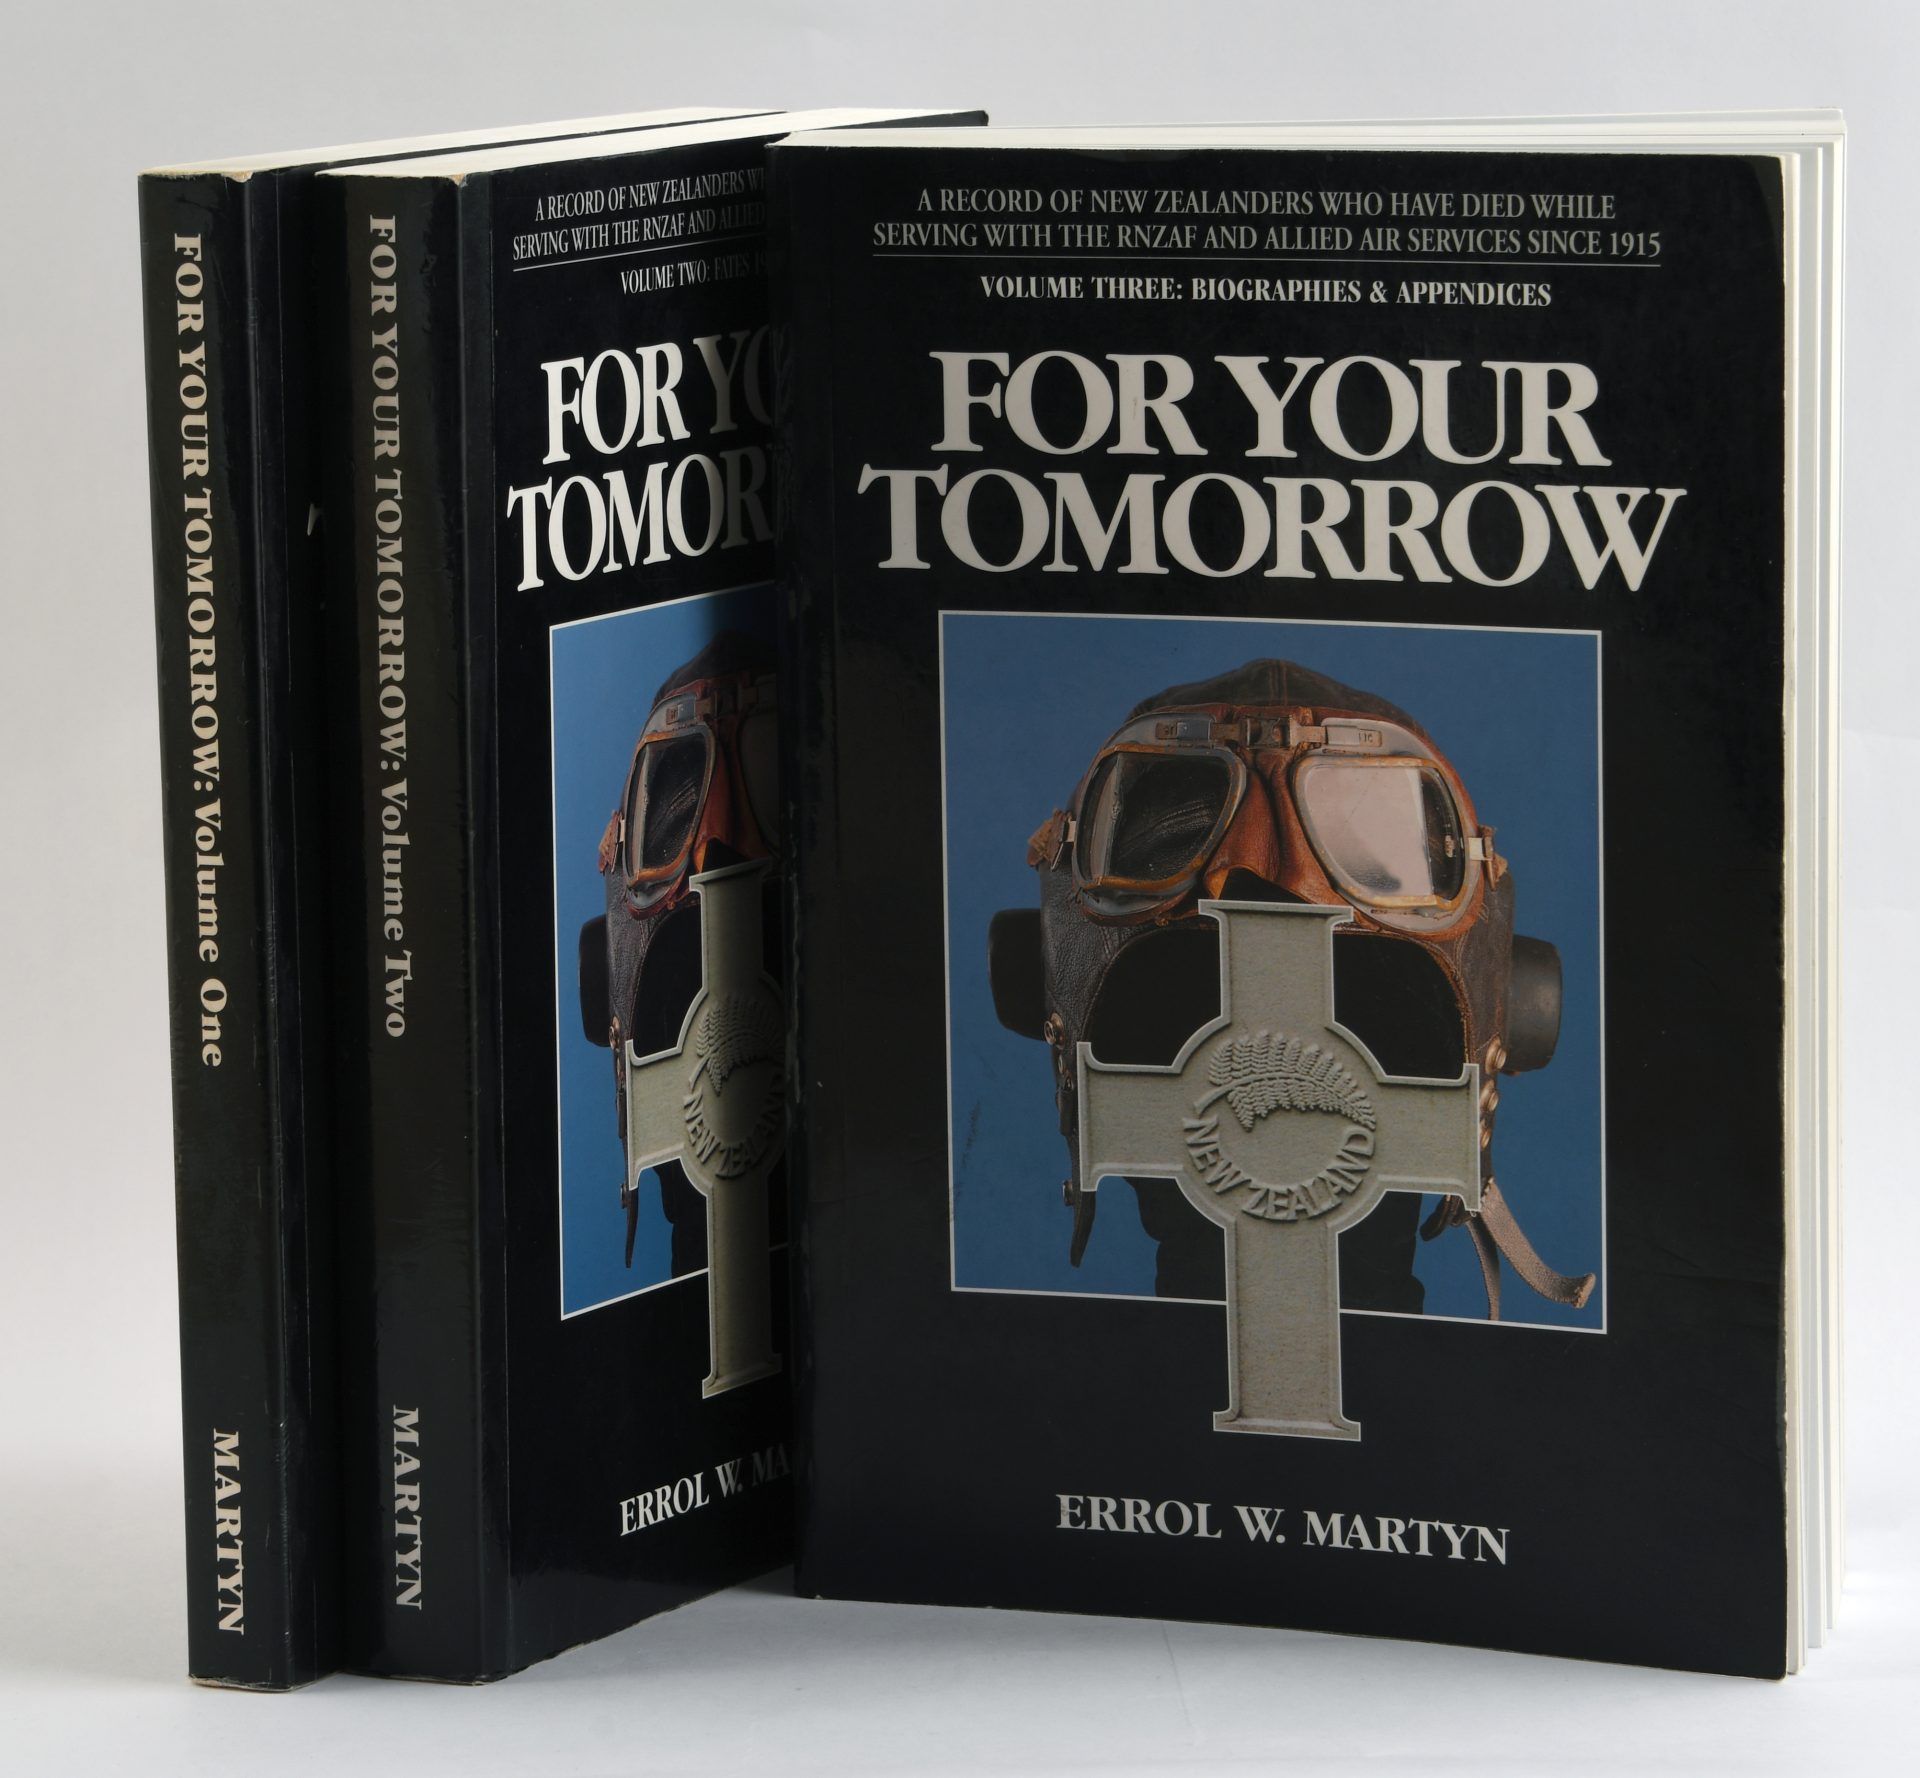 For-Your-Tomorrow-3-books-side-by-side